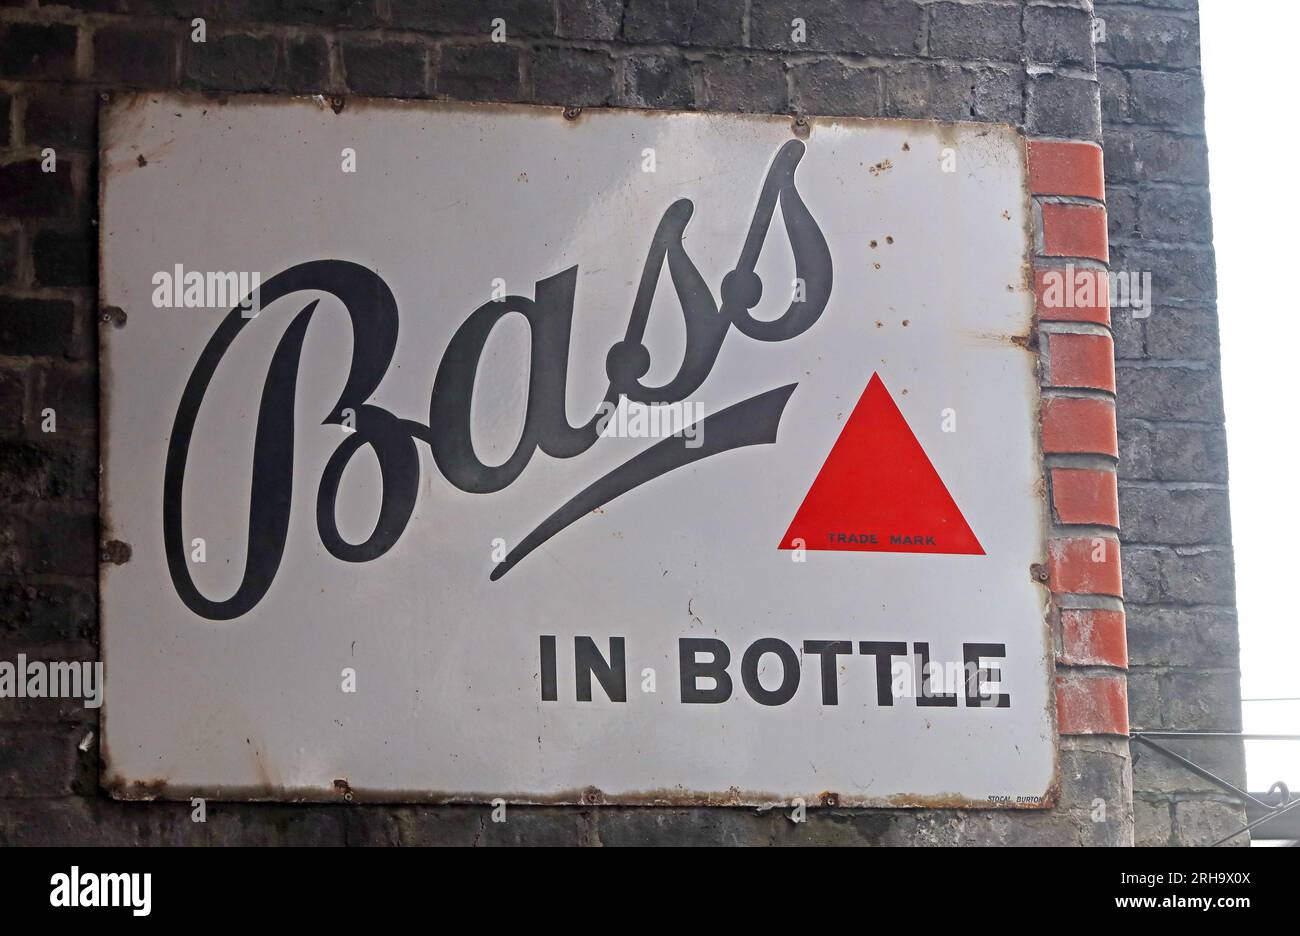 Famous Bass in Bottle brand trademark, red triangle 1875, on a metal enamel sign, Wigan, Lancashire, England, UK Stock Photo